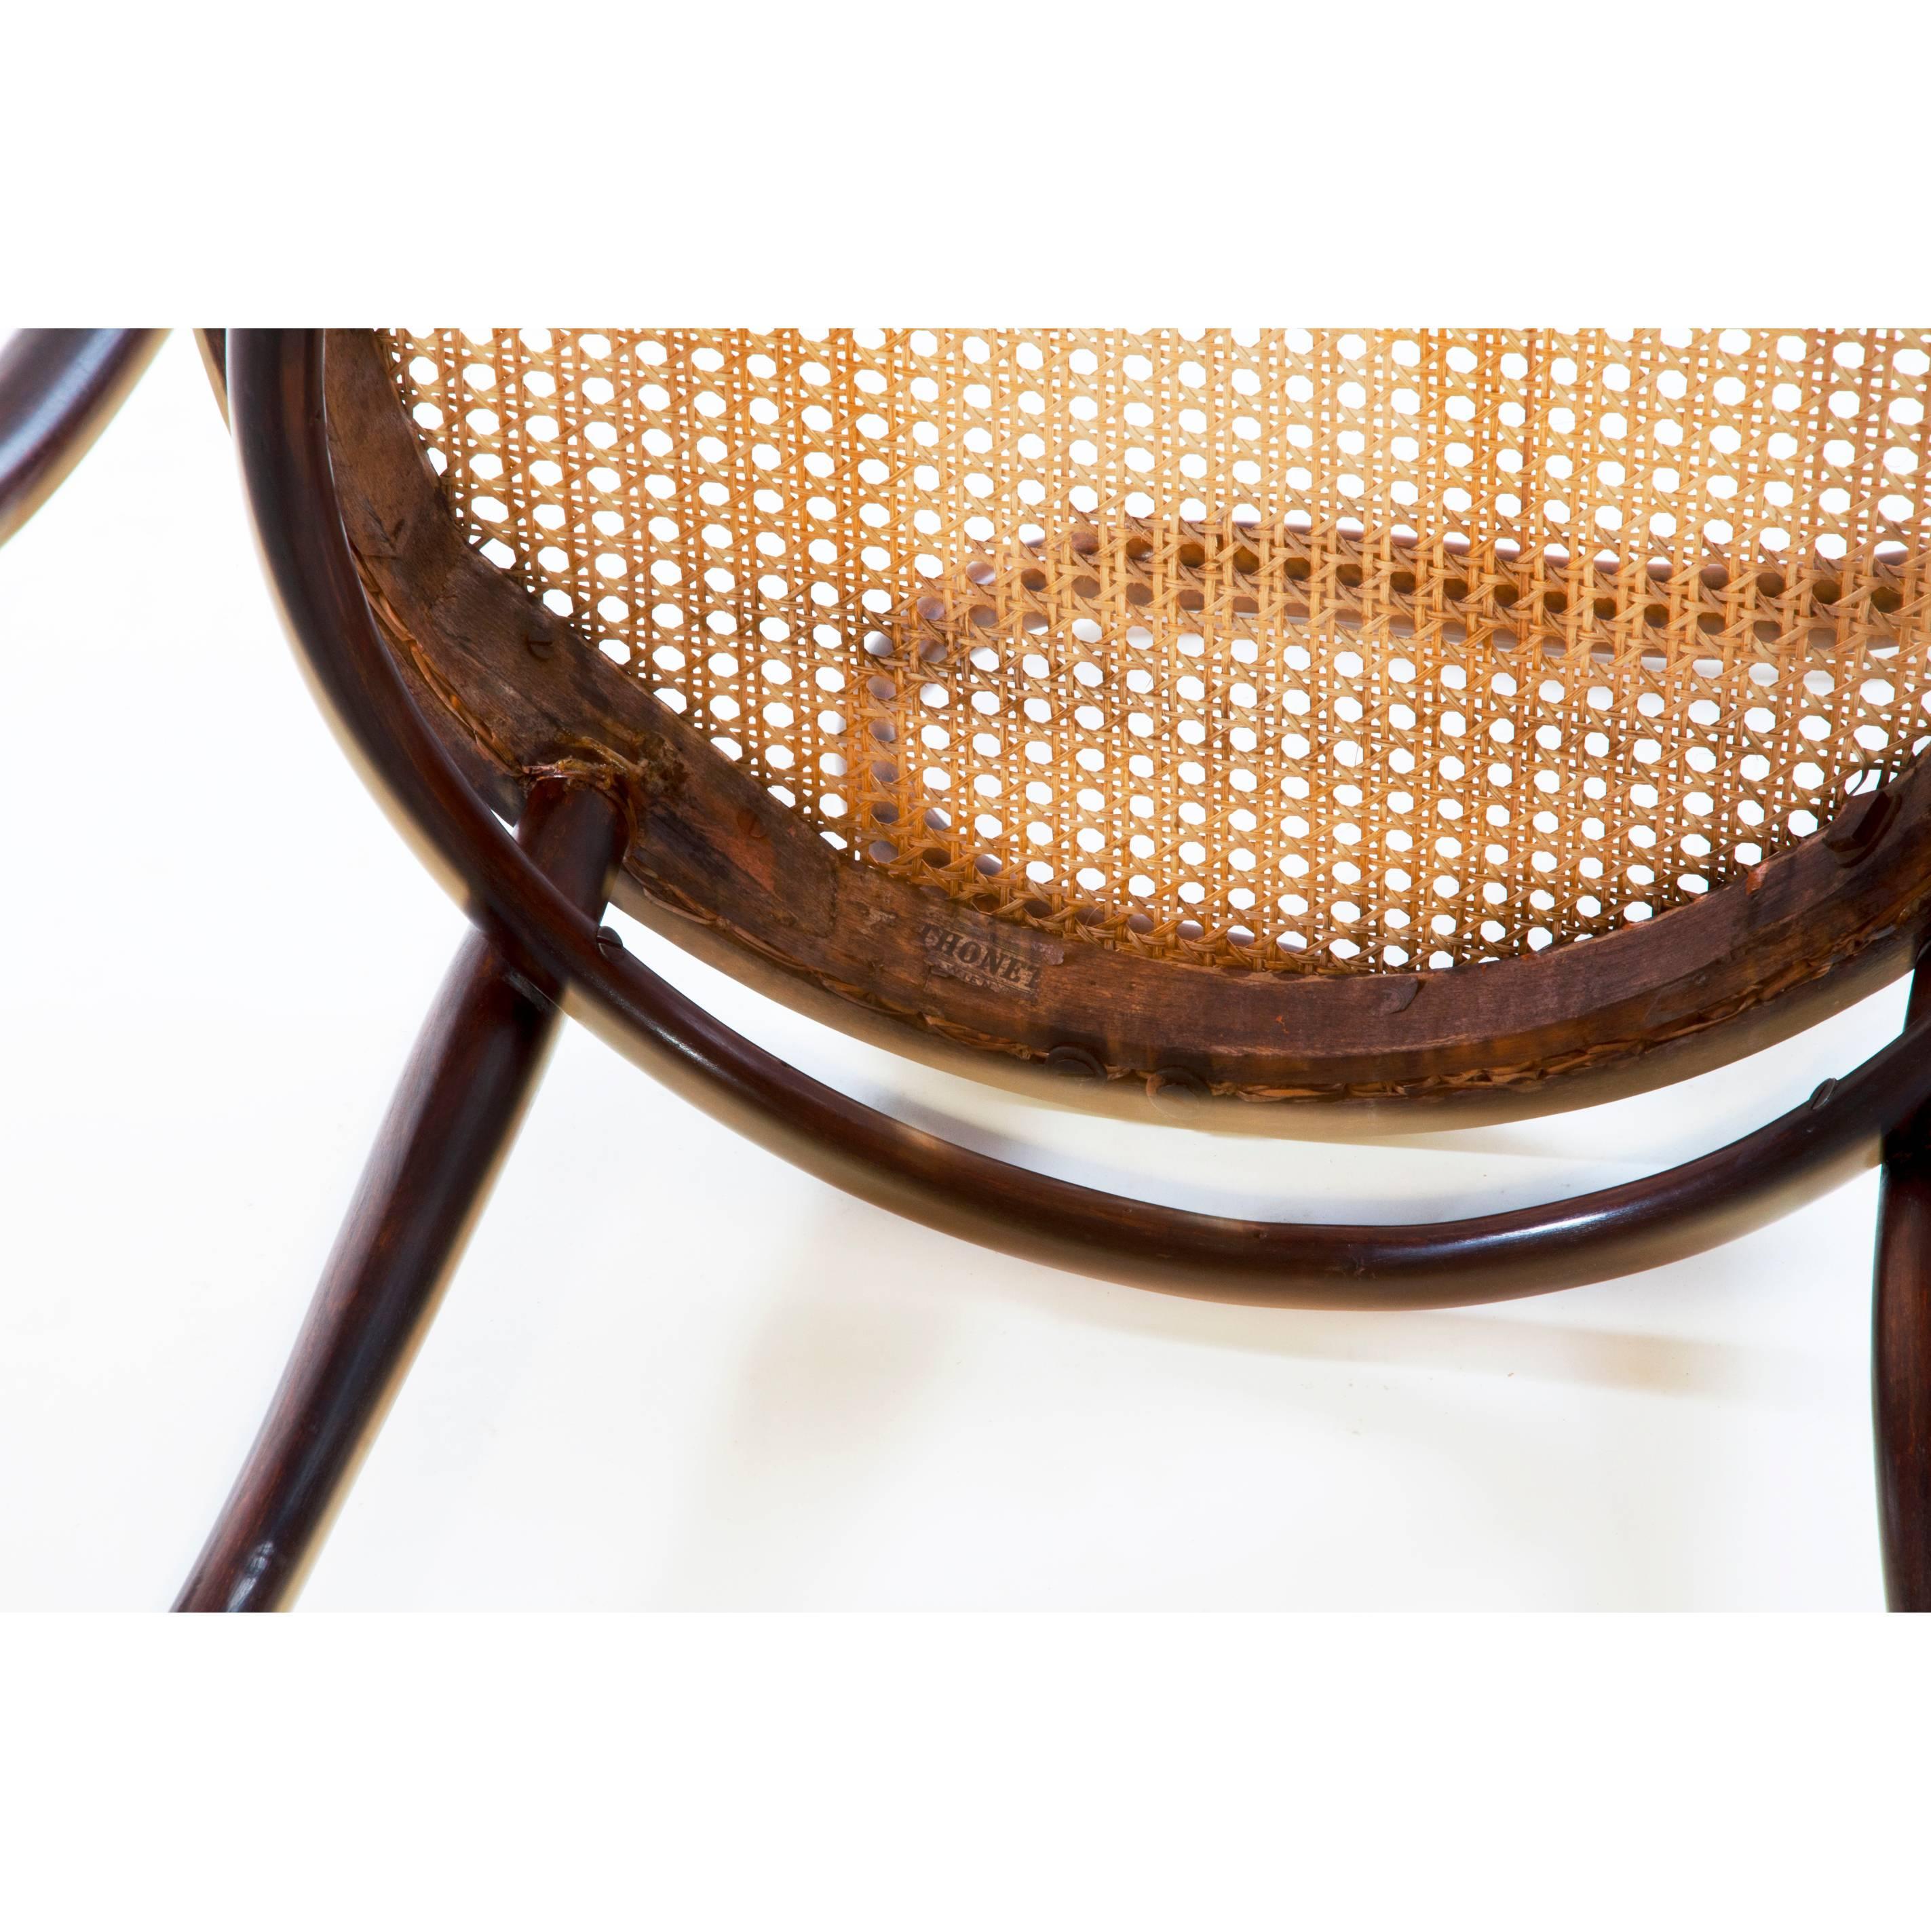 Wicker Antique Thonet Bentwood Armchair Fauteuil No. 20, circa 1900 For Sale